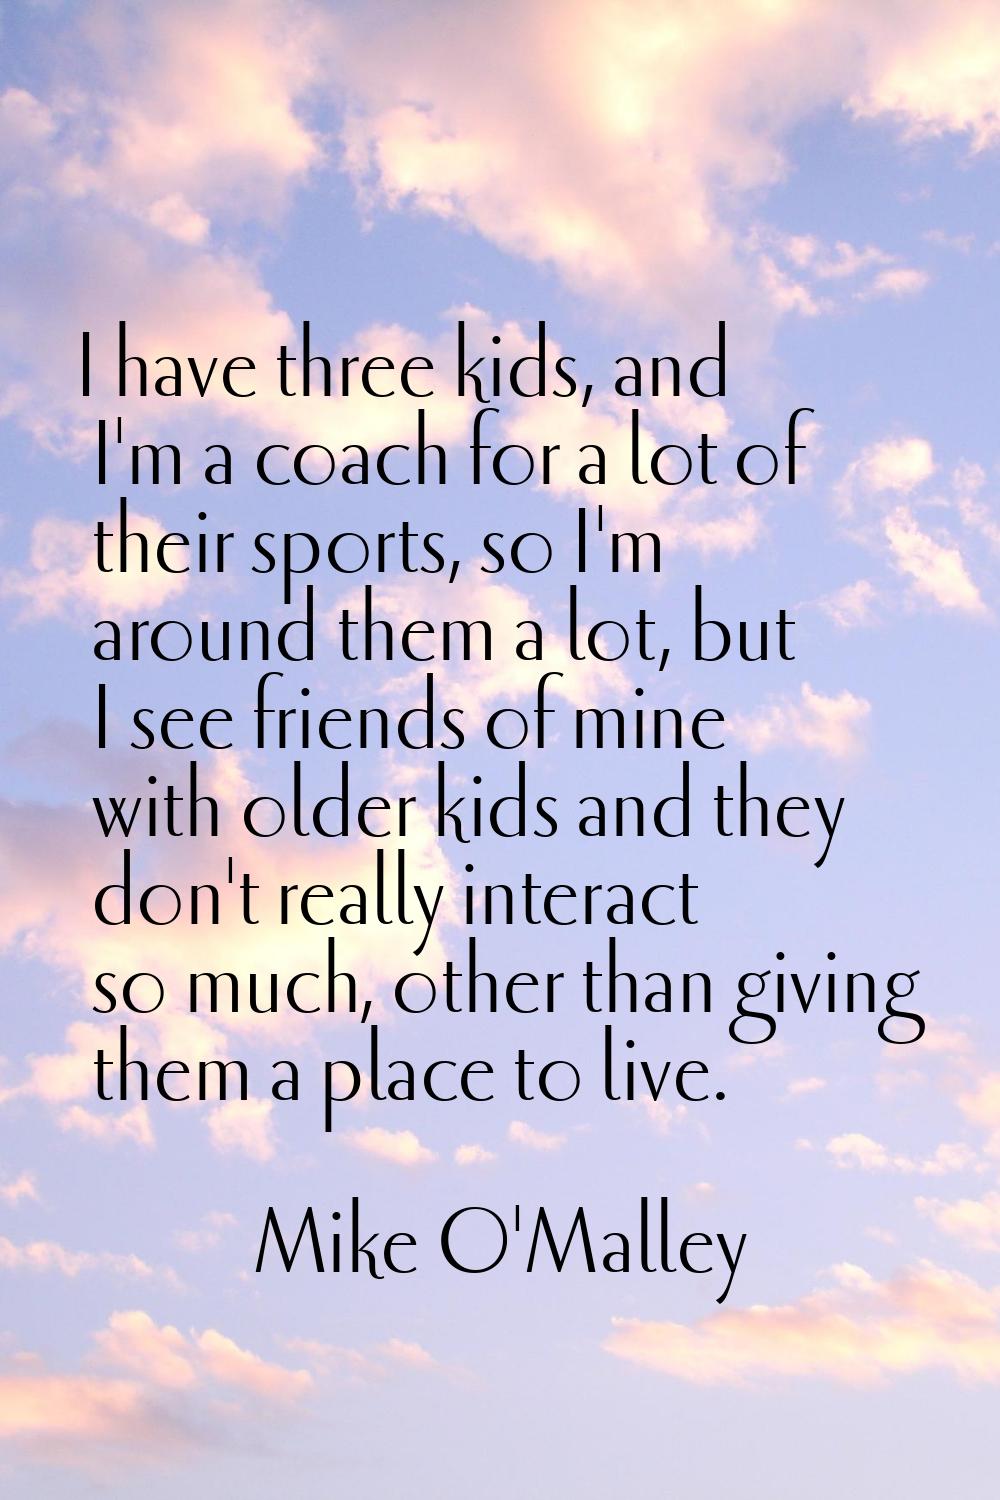 I have three kids, and I'm a coach for a lot of their sports, so I'm around them a lot, but I see f